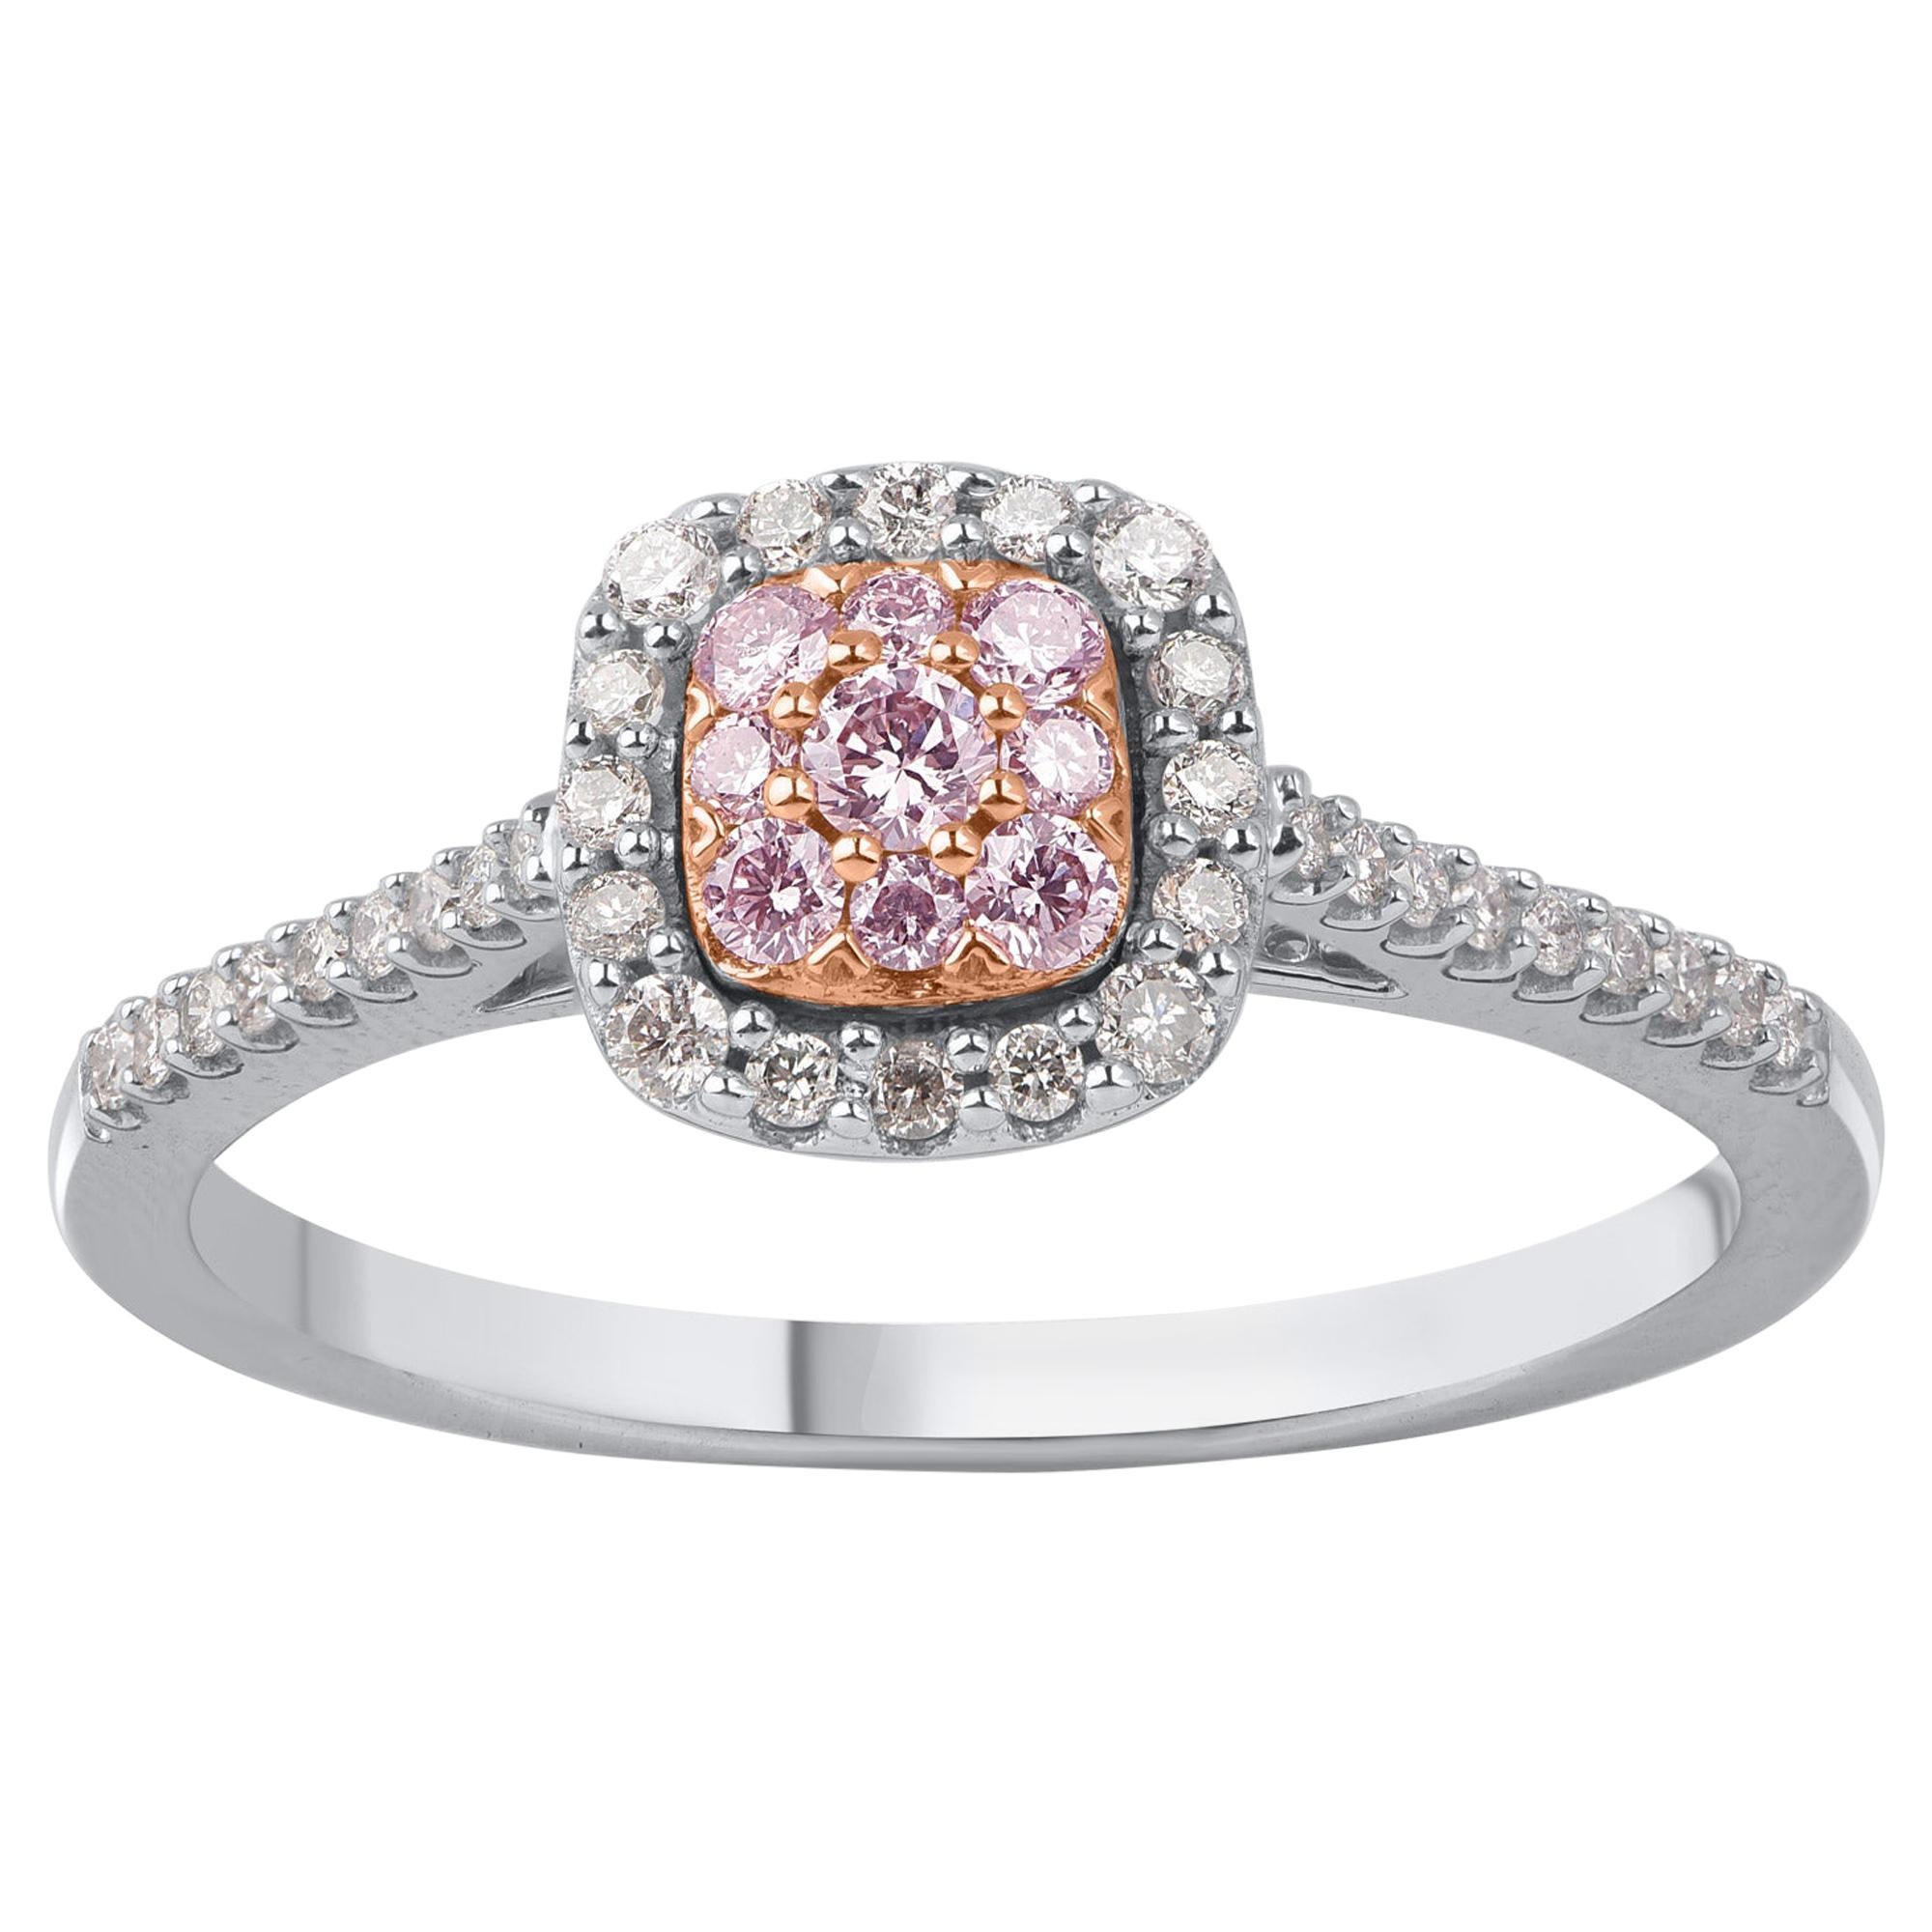 TJD IGICertified 0.35CT White&Nat.Pink Rosé Diamond 18K 2-Tone Gold Cluster Ring For Sale